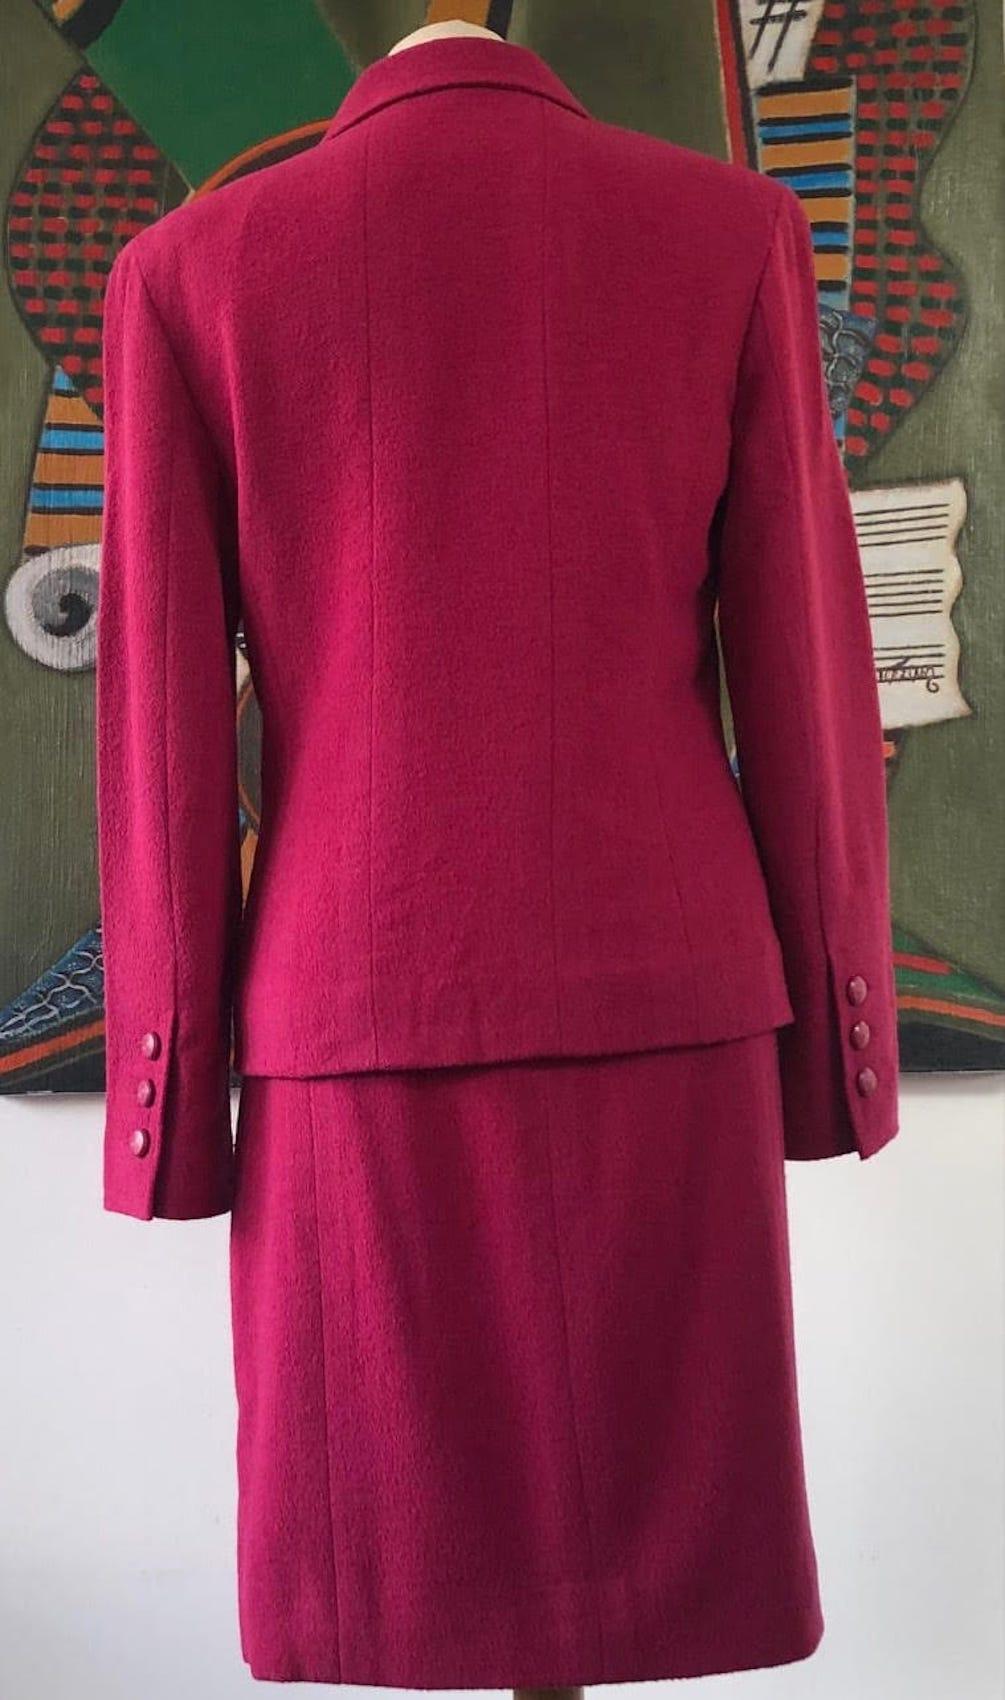 CHANEL 1998 Wool Jacket Tweed Skirt Suit Pink CC Logo Buttons 1